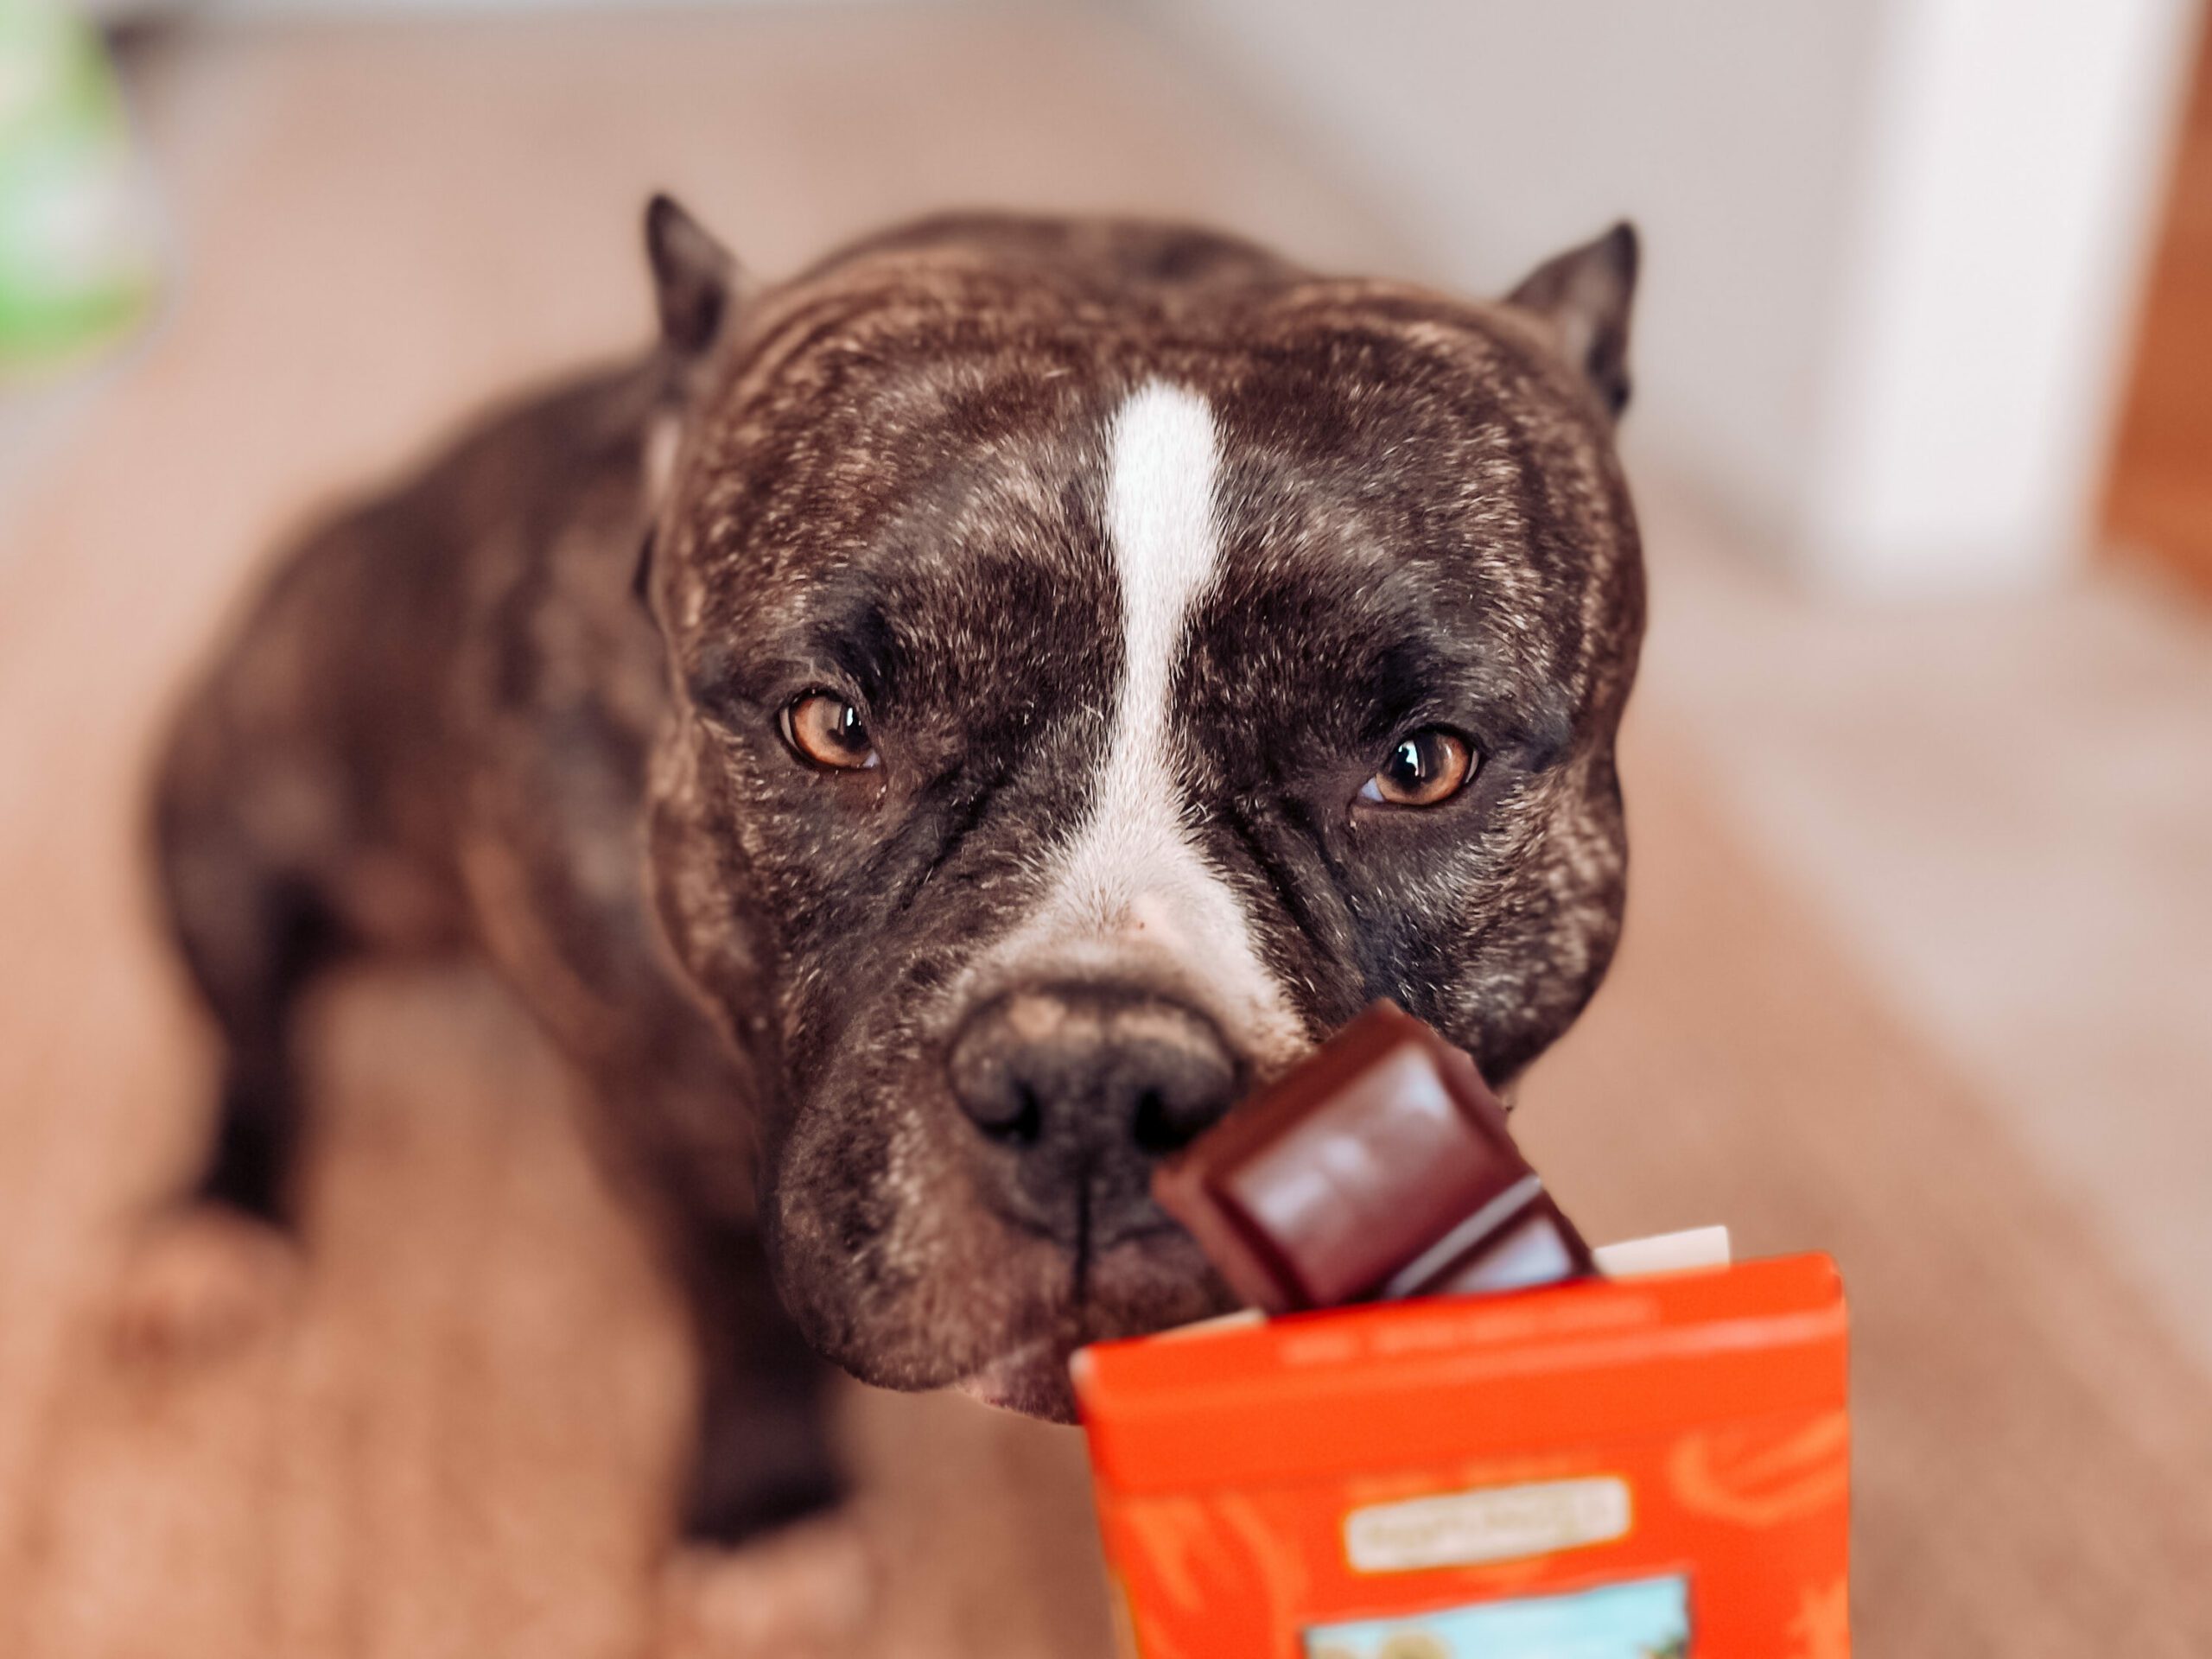 Ruby, our pocket-sized American Bully, sniffing a chocolate bar, not knowing, how dangerous it can be for her.